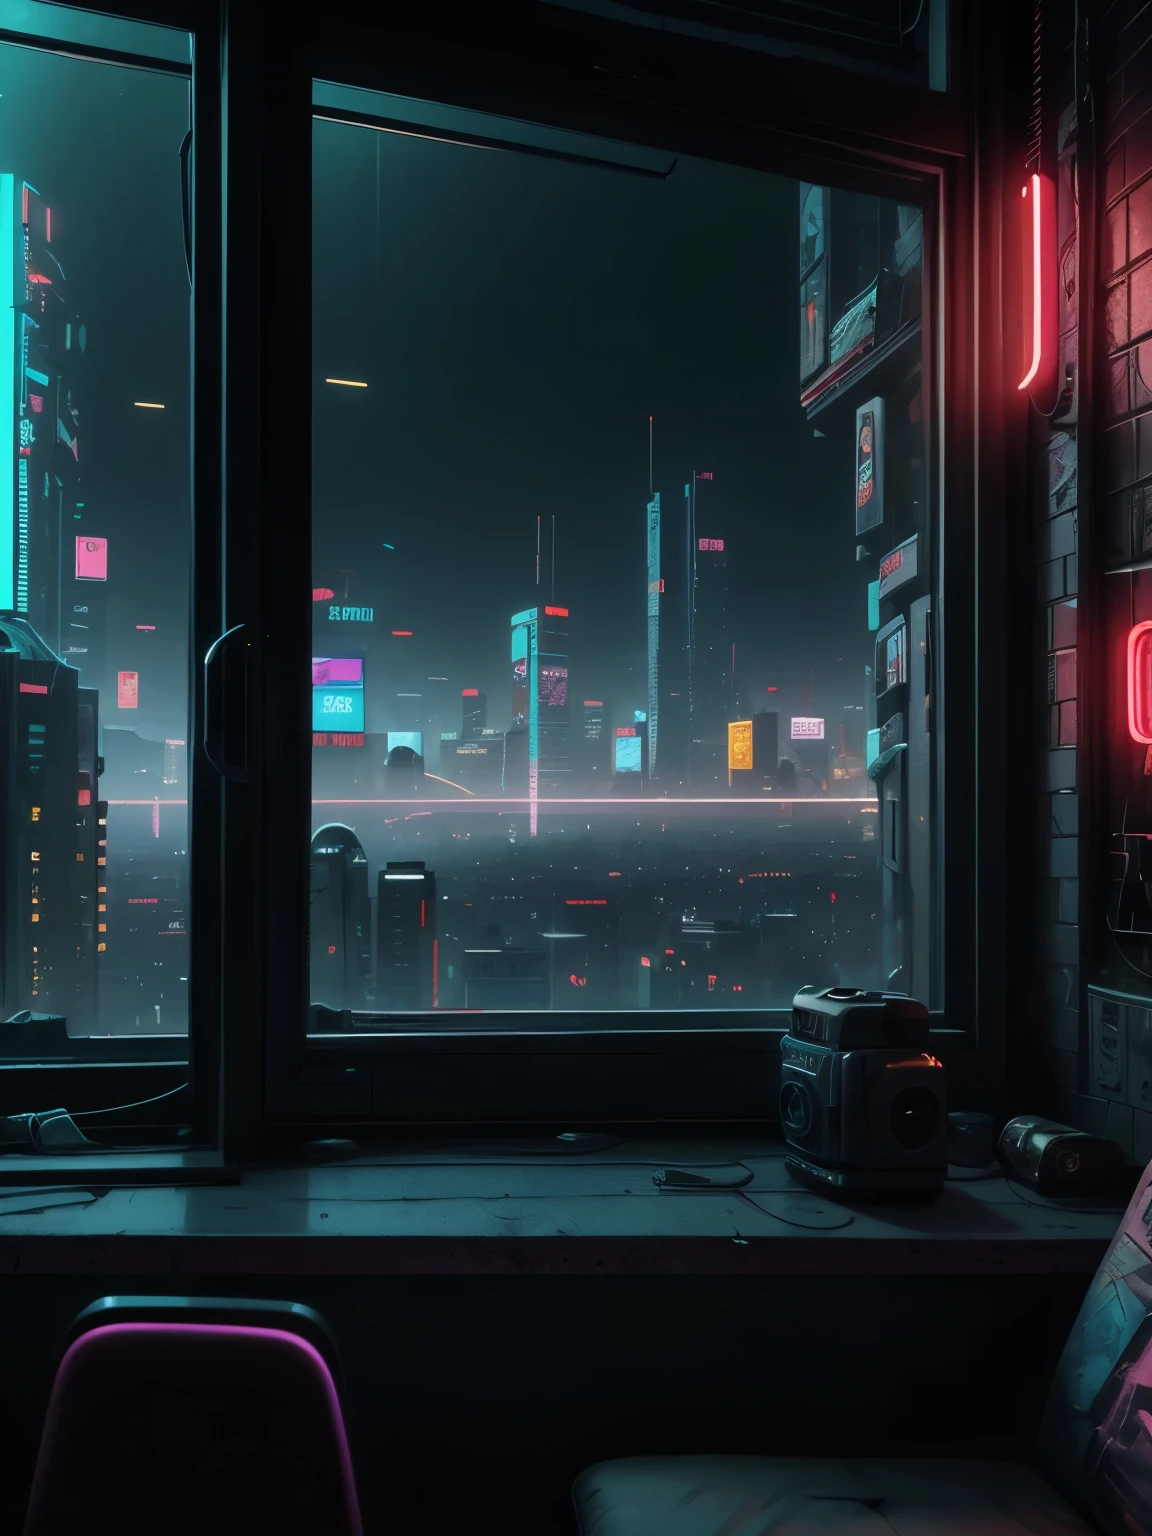 Generate a cozy and peaceful interior with a large window directly across from the camera. Through the window is a massive (((cyberpunk cityscape))) with (neon lights), highly detailed buildings, and colorful accents. The window and cityscape are important and should be focal points of the image. The room offers a sanctuary from the busy details of everyday life. This image should contrast quiet interiors with vibrant, busy, dynamic exteriors. Take inspiration from Kamen Nikolov's cyberpunk work on Artstation. Utilize trending art styles and dynamic lighting to create a ((masterpiece)). 